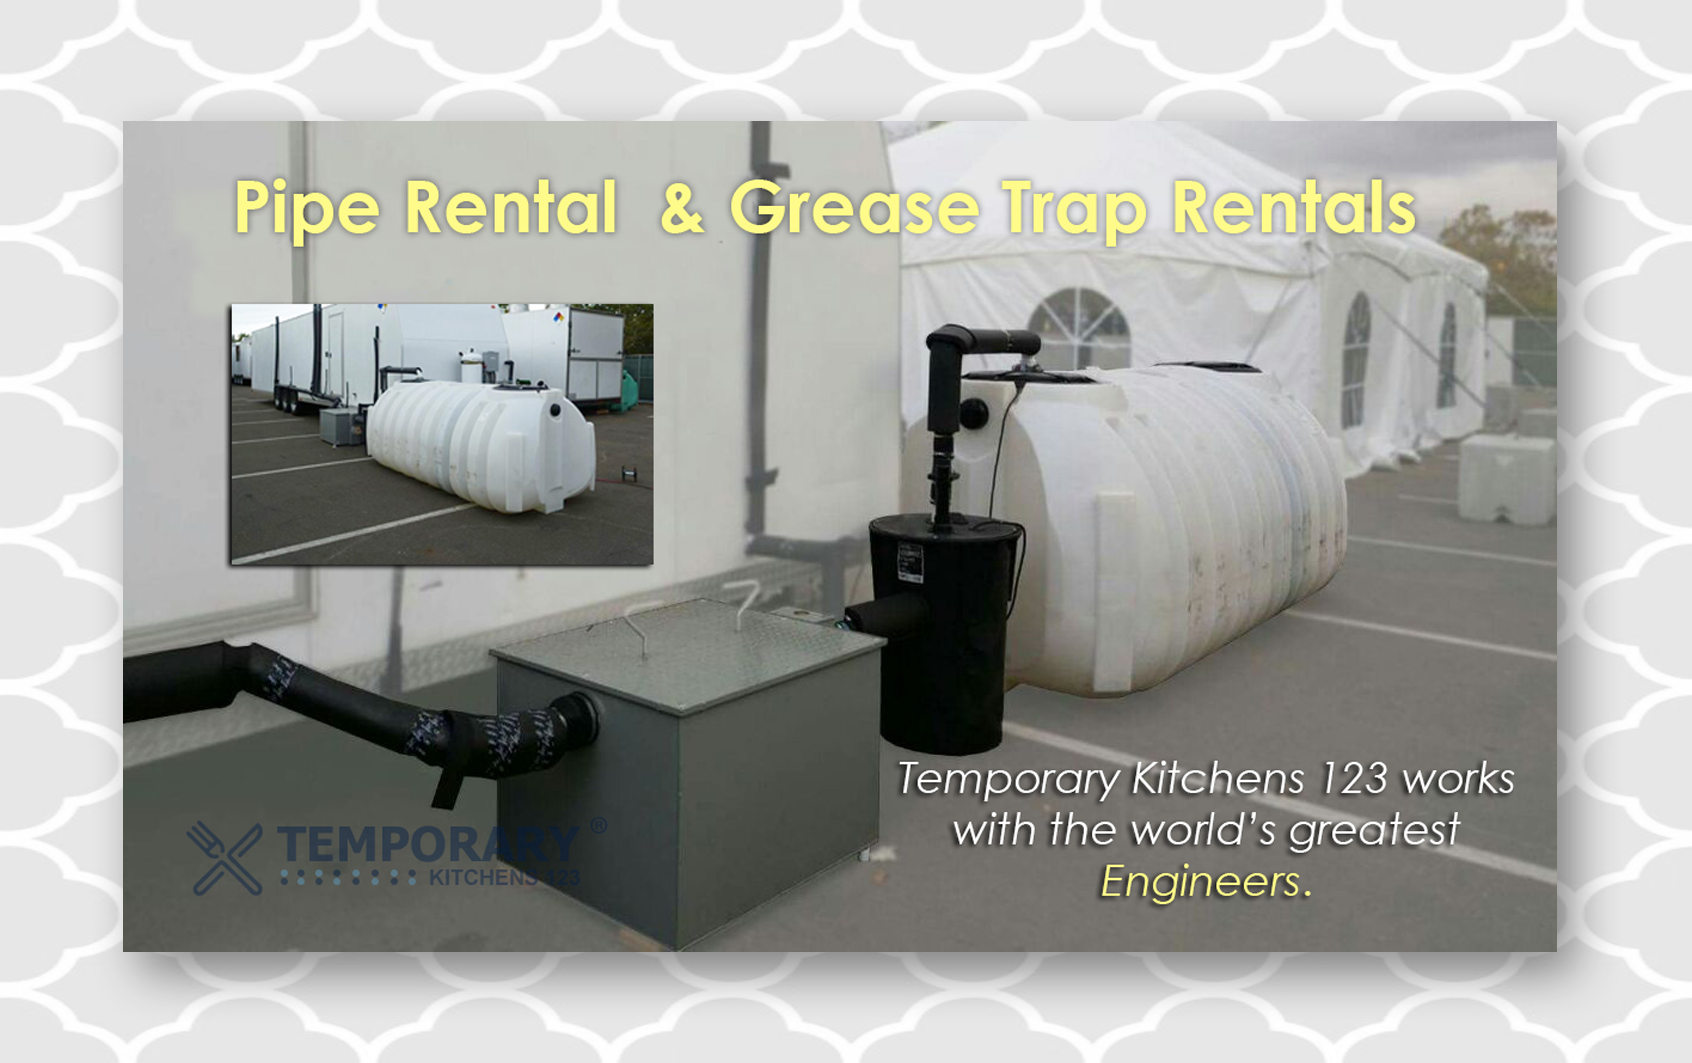 Grease Trap Pipe Rental Temporary Kitchens 123